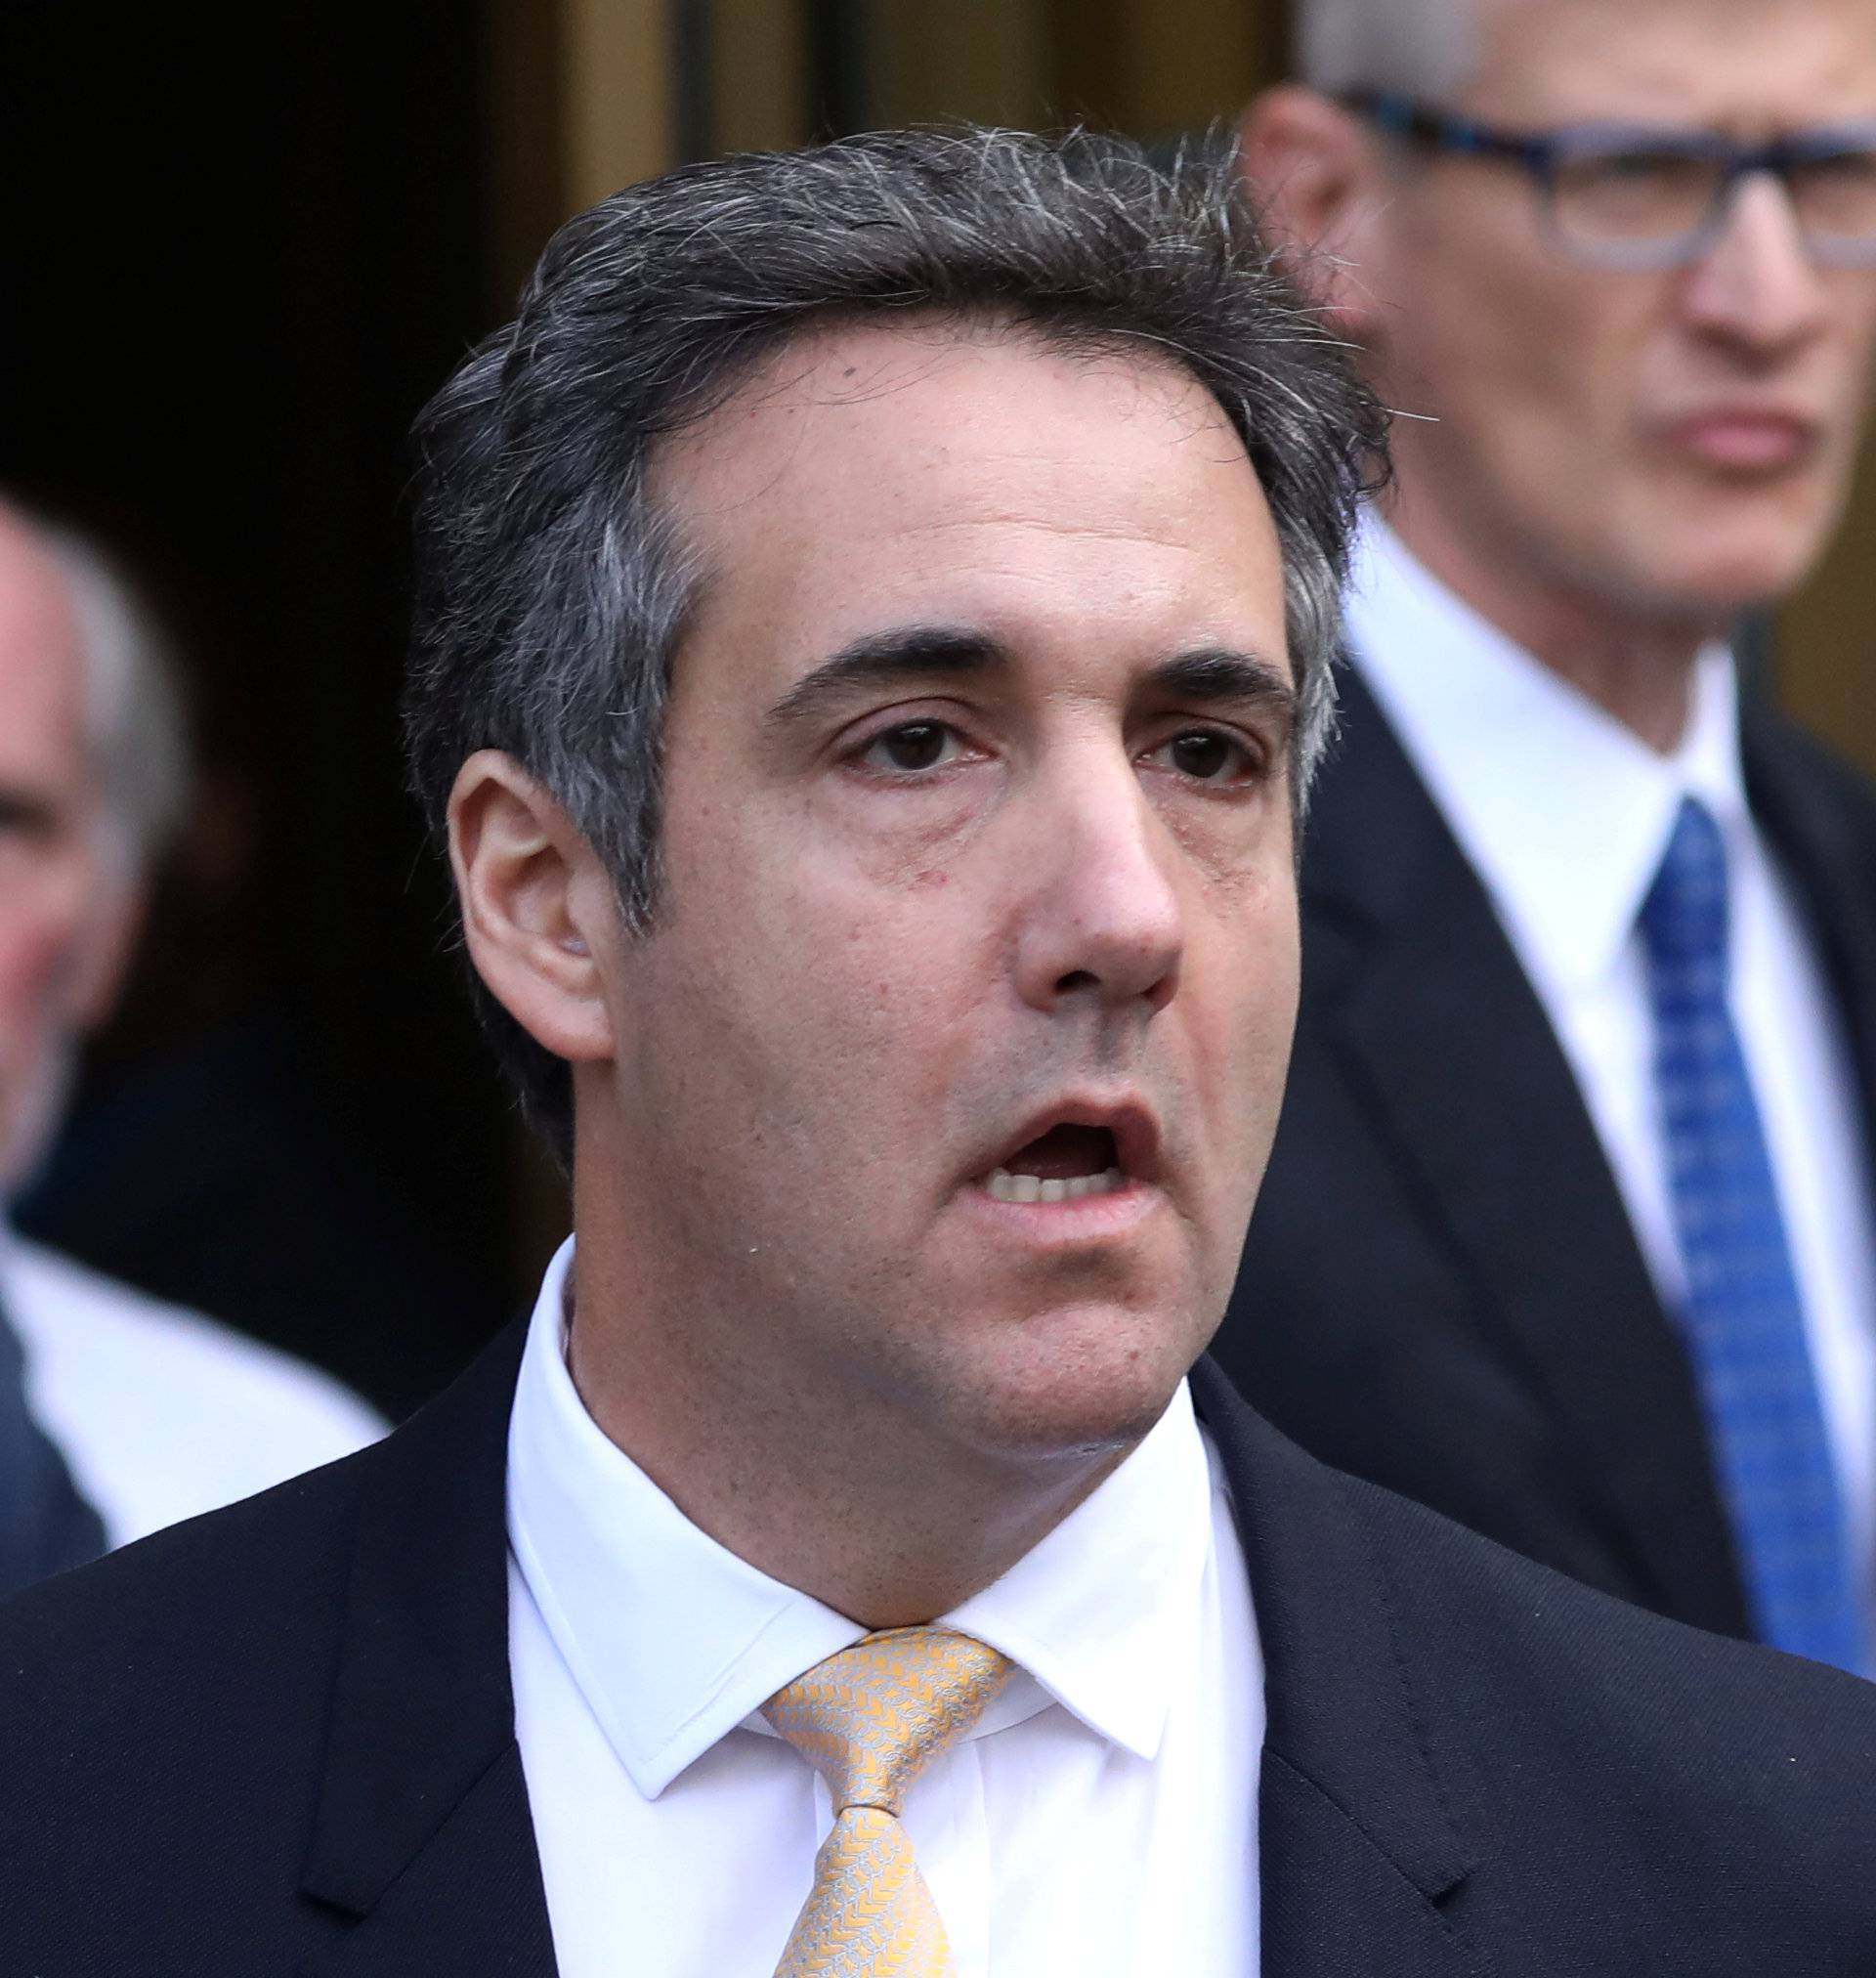 U.S. President Donald Trump's former lawyer, Michael Cohen, leaves federal court in New York City